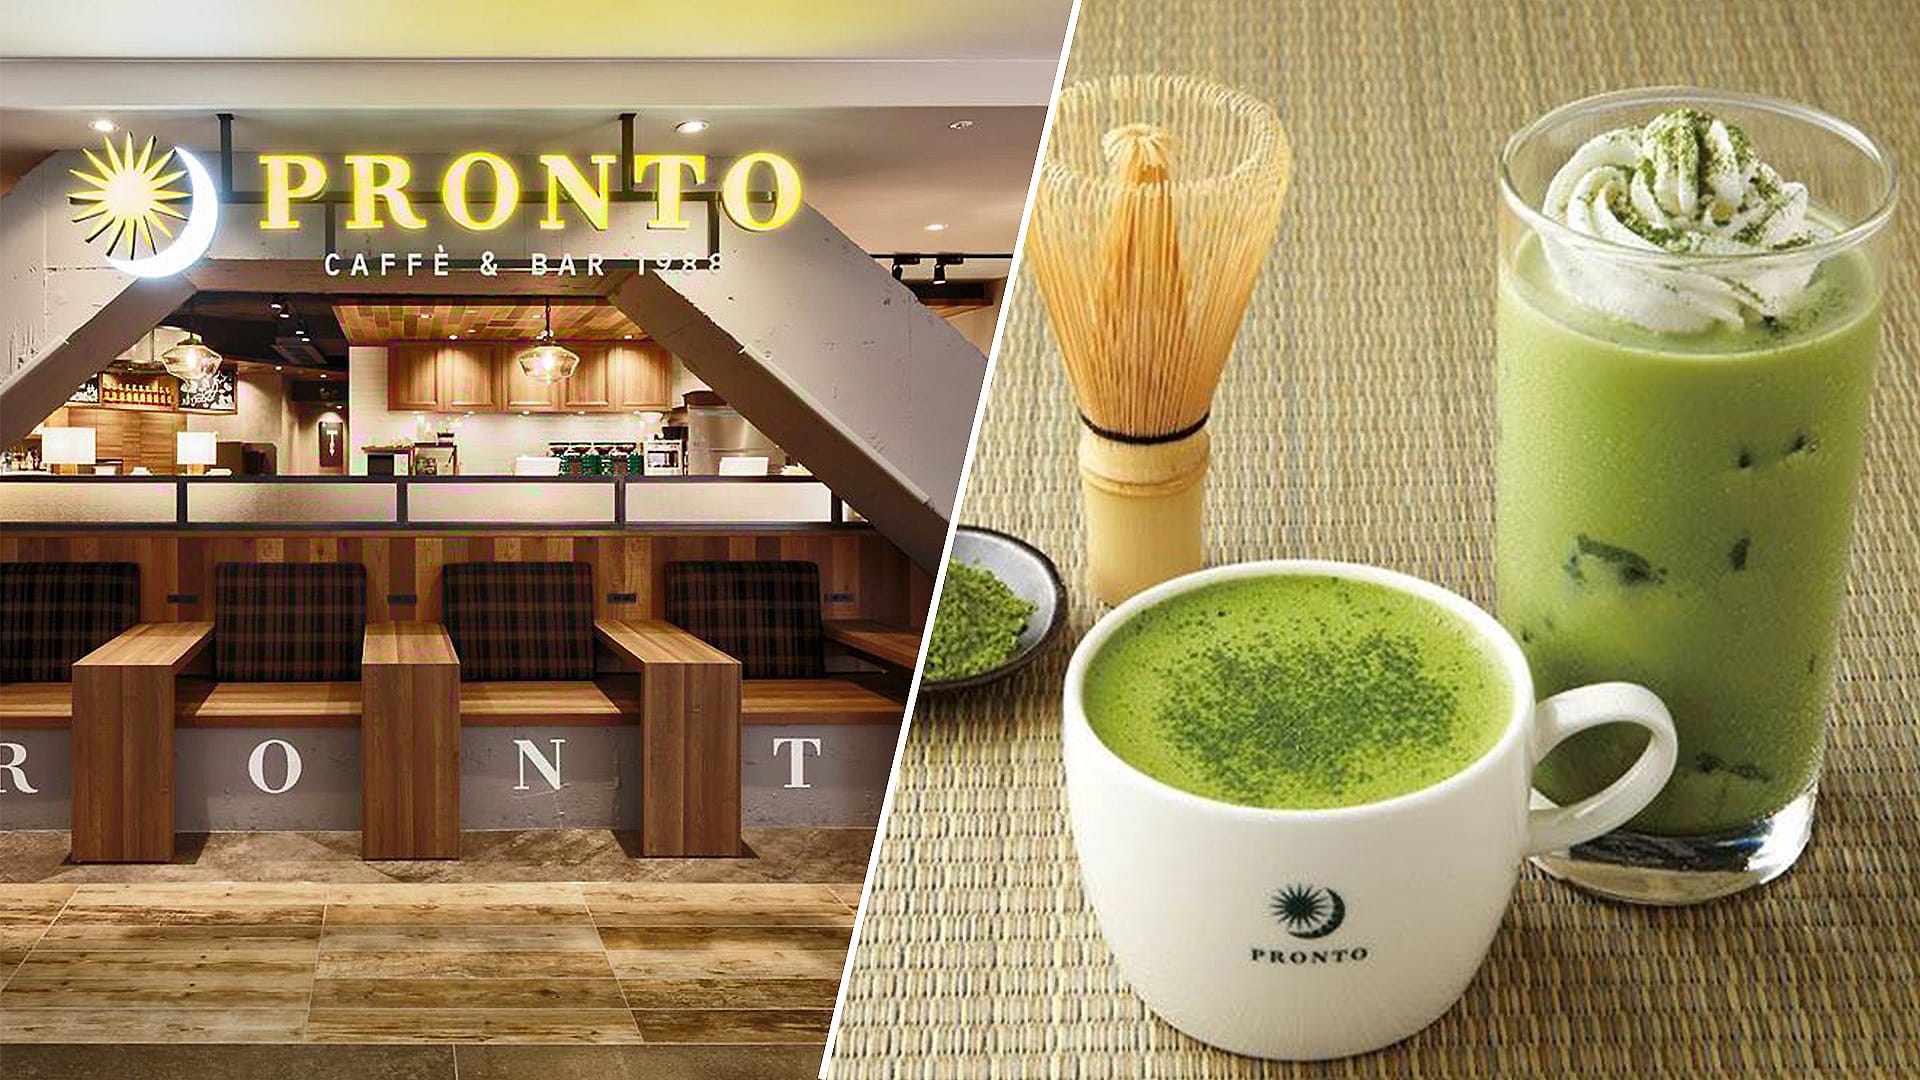 Japanese-Italian Café Chain Pronto From Tokyo Coming To Singapore